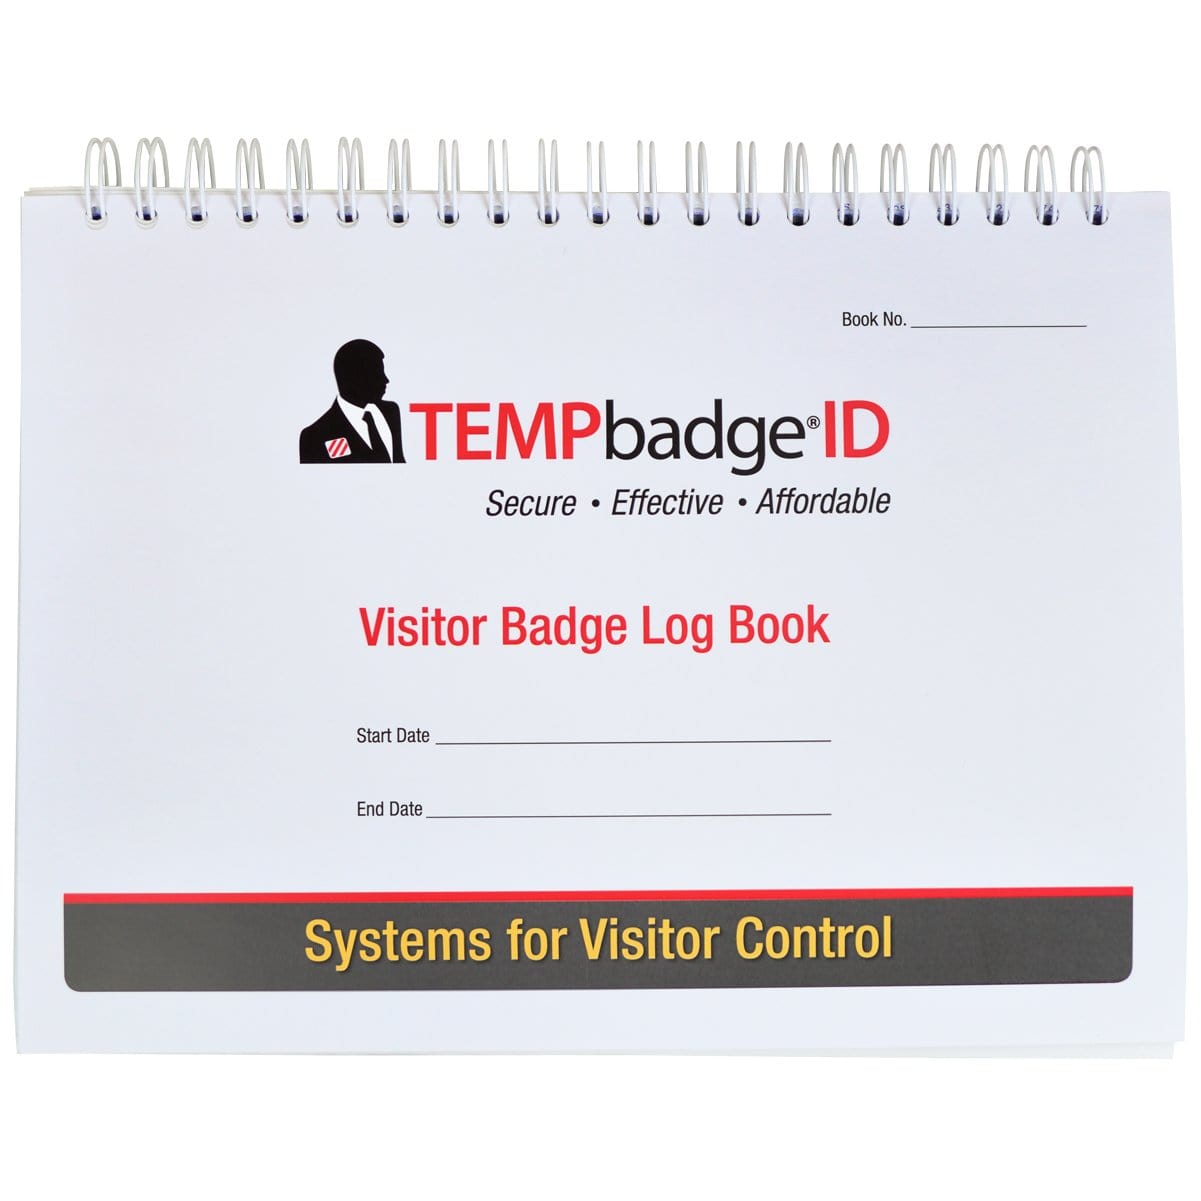 Front cover of a spiral-bound Expiring Visitor Badge and Log Book - 480 Badges (05741) from TEMPbadge ID, used for logging visitor information. The cover includes fields for "Start Date" and "End Date" and promotes a comprehensive visitor management system with self-expiring visitor badges.